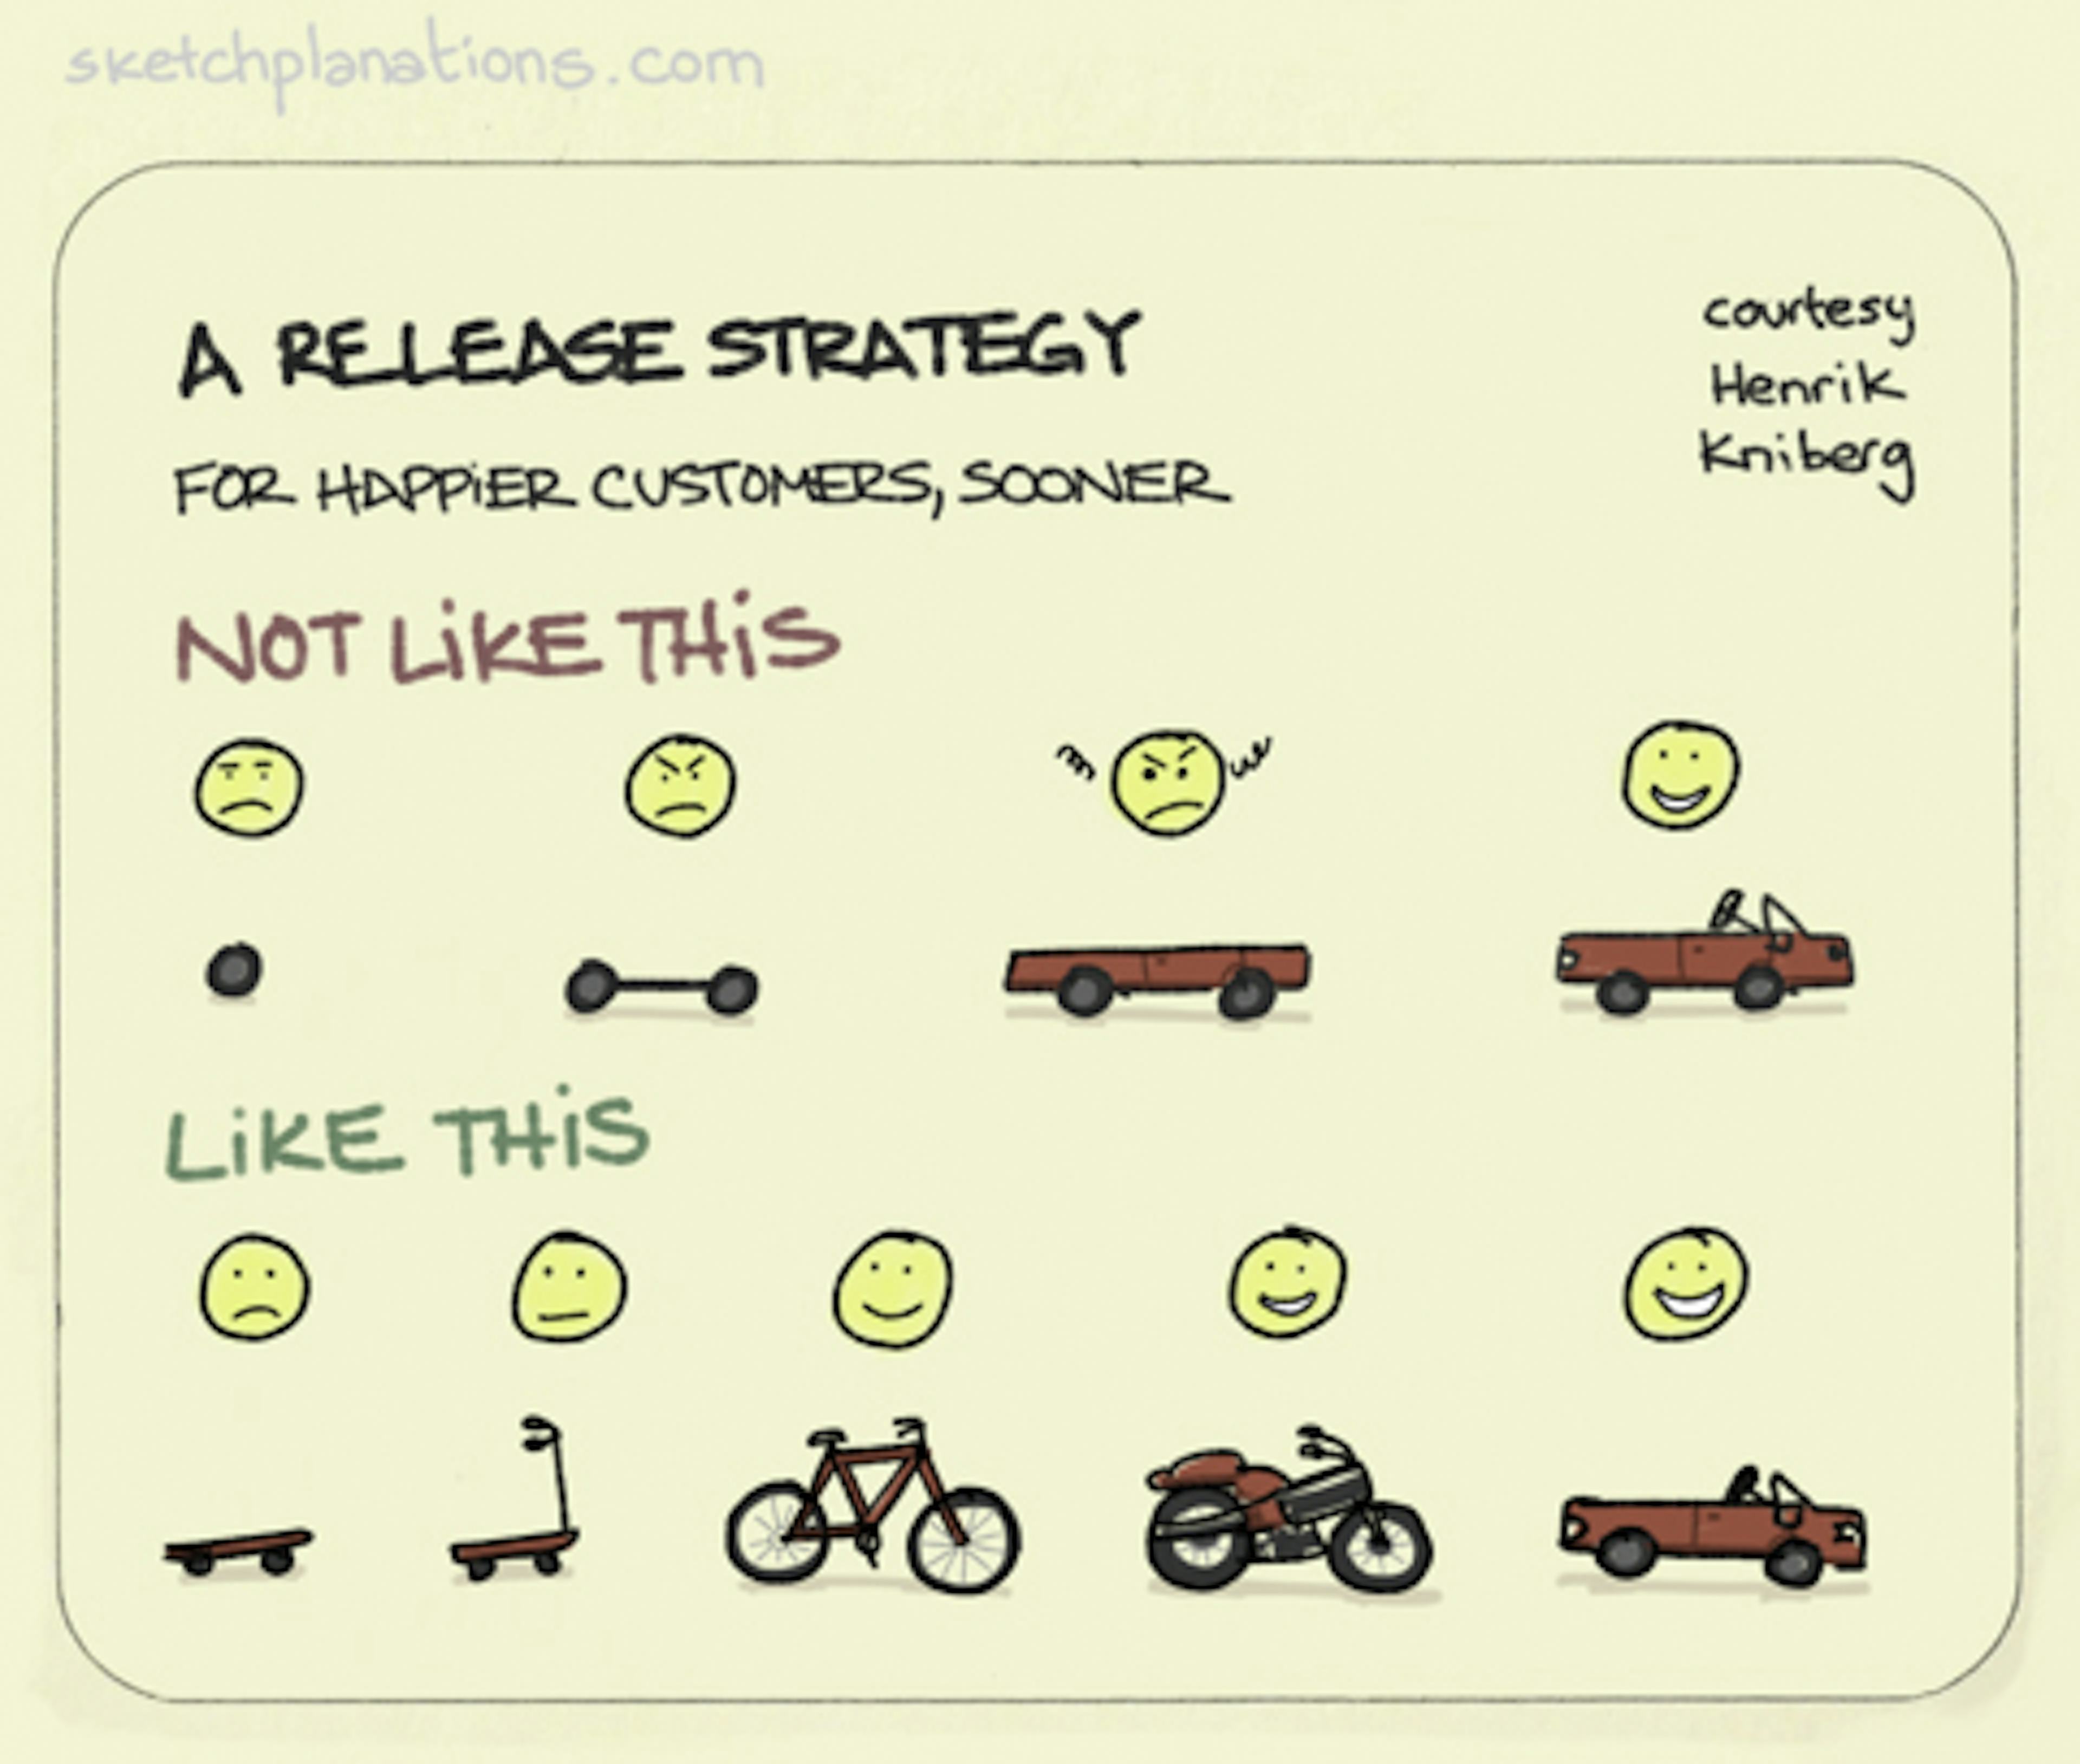 A release strategy for happier customers, sooner - Sketchplanations